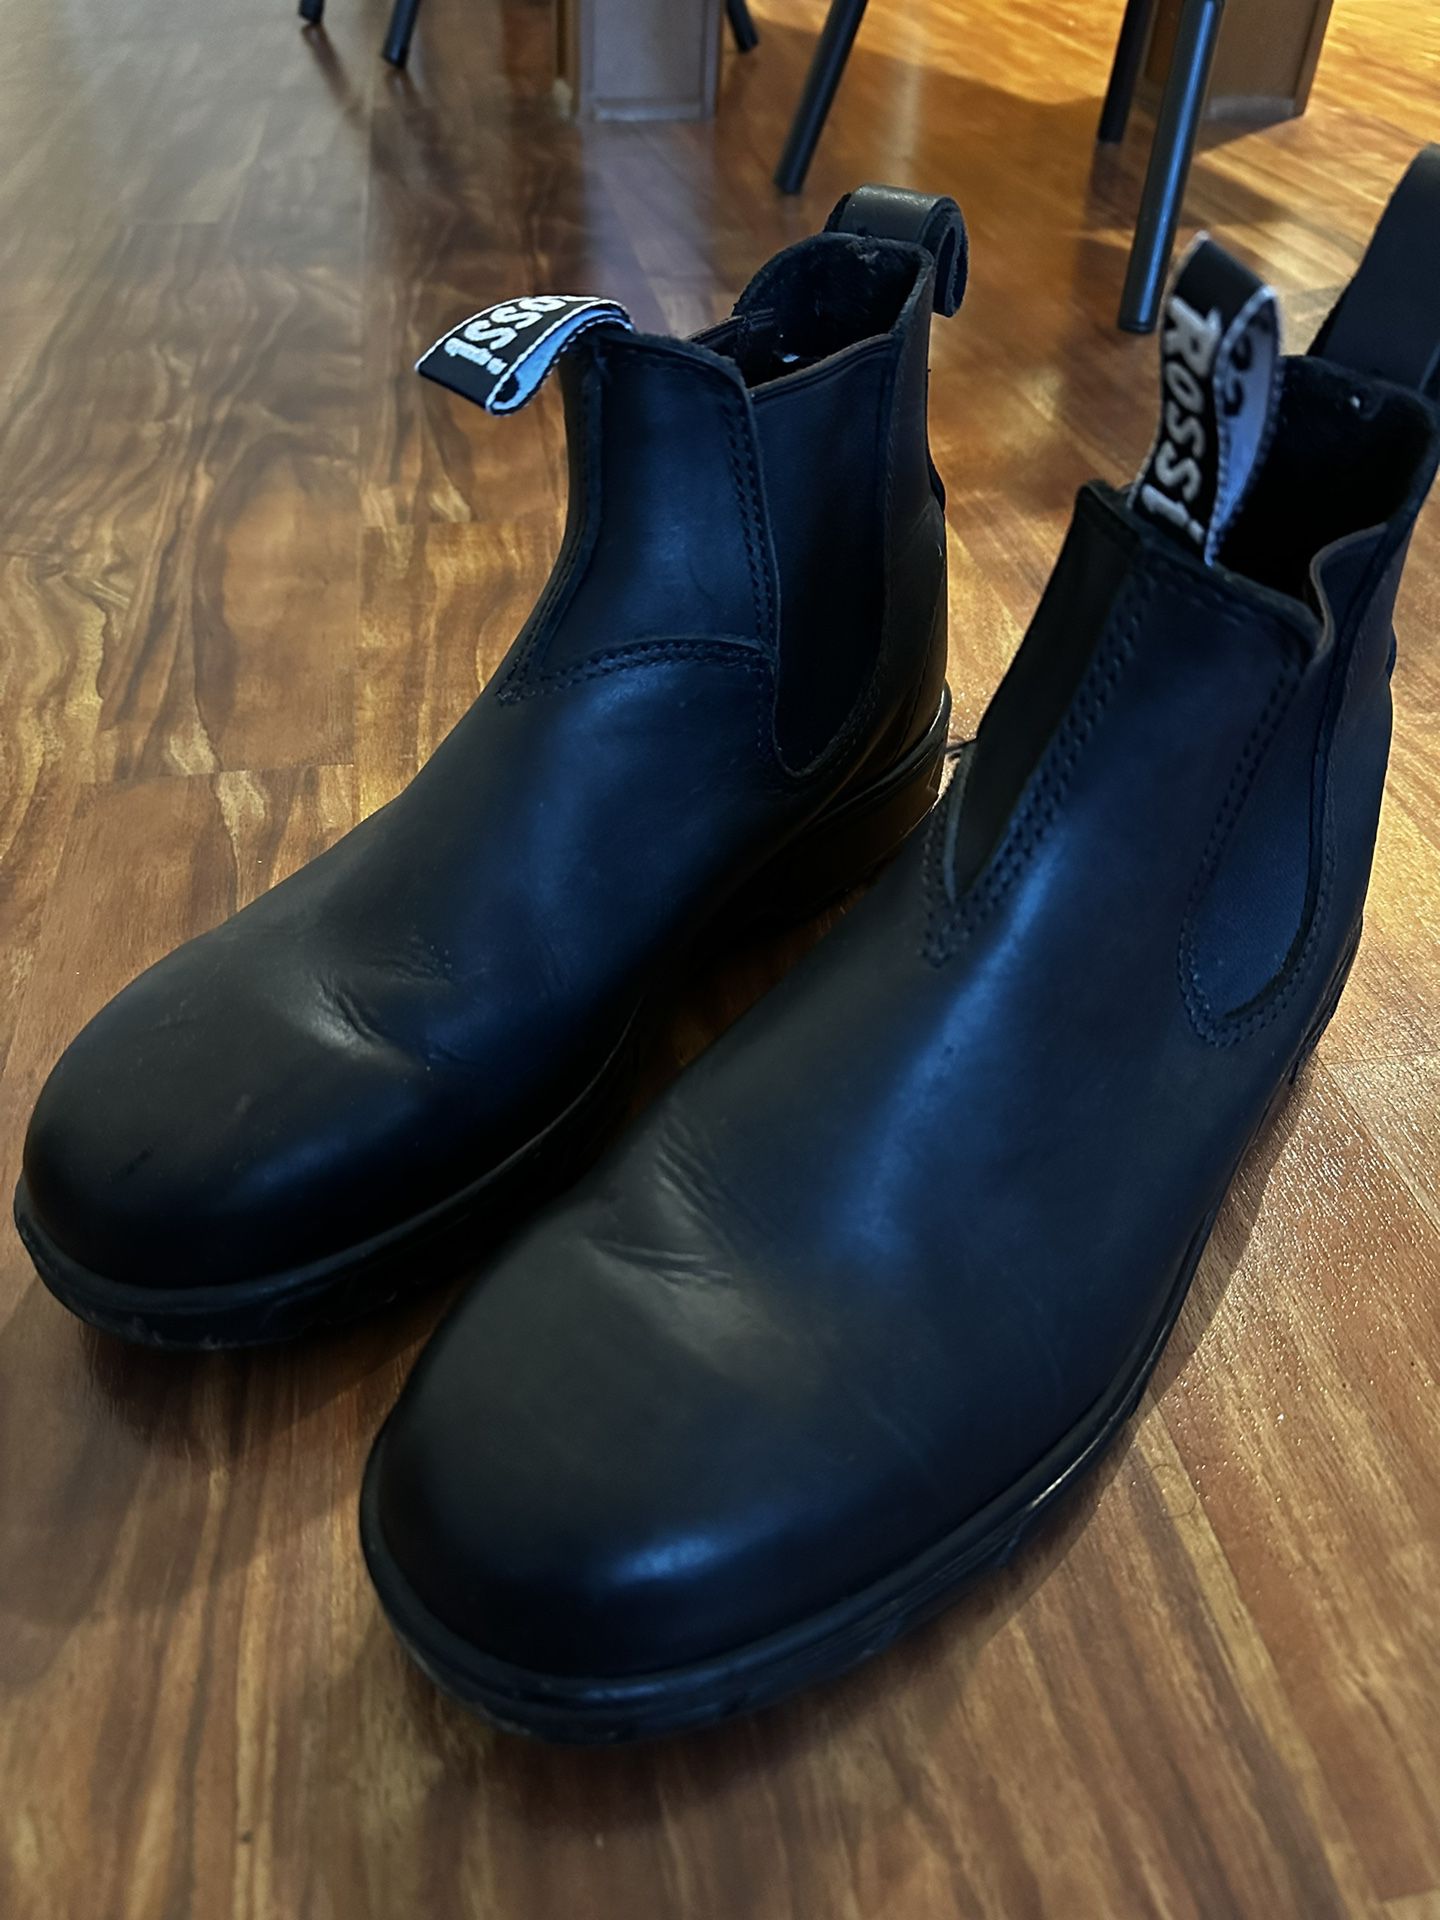 Rossi Australian Boots 301 for Sale in Cary, NC - OfferUp